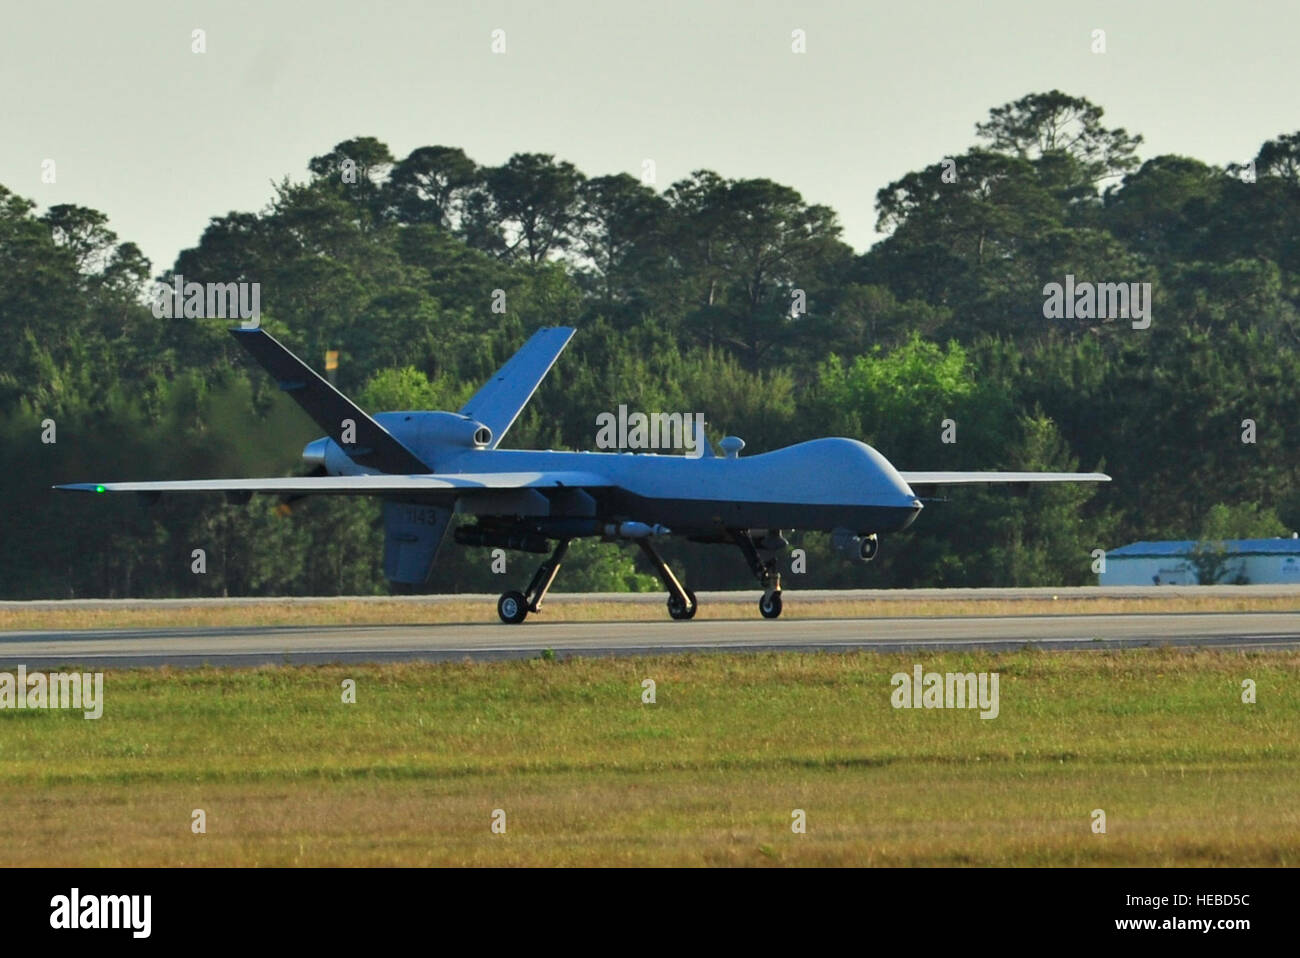 An MQ-9 Reaper prepares to take off at Hurlburt Field Fla., May 3, 2014.The MQ-9 Reaper is an armed, multi-mission, medium-altitude, long-endurance remotely piloted aircraft that is employed primarily as an intelligence-collection asset and secondarily against dynamic execution targets.(U.S. Air Force photo/Staff Sgt. John Bainter) Stock Photo